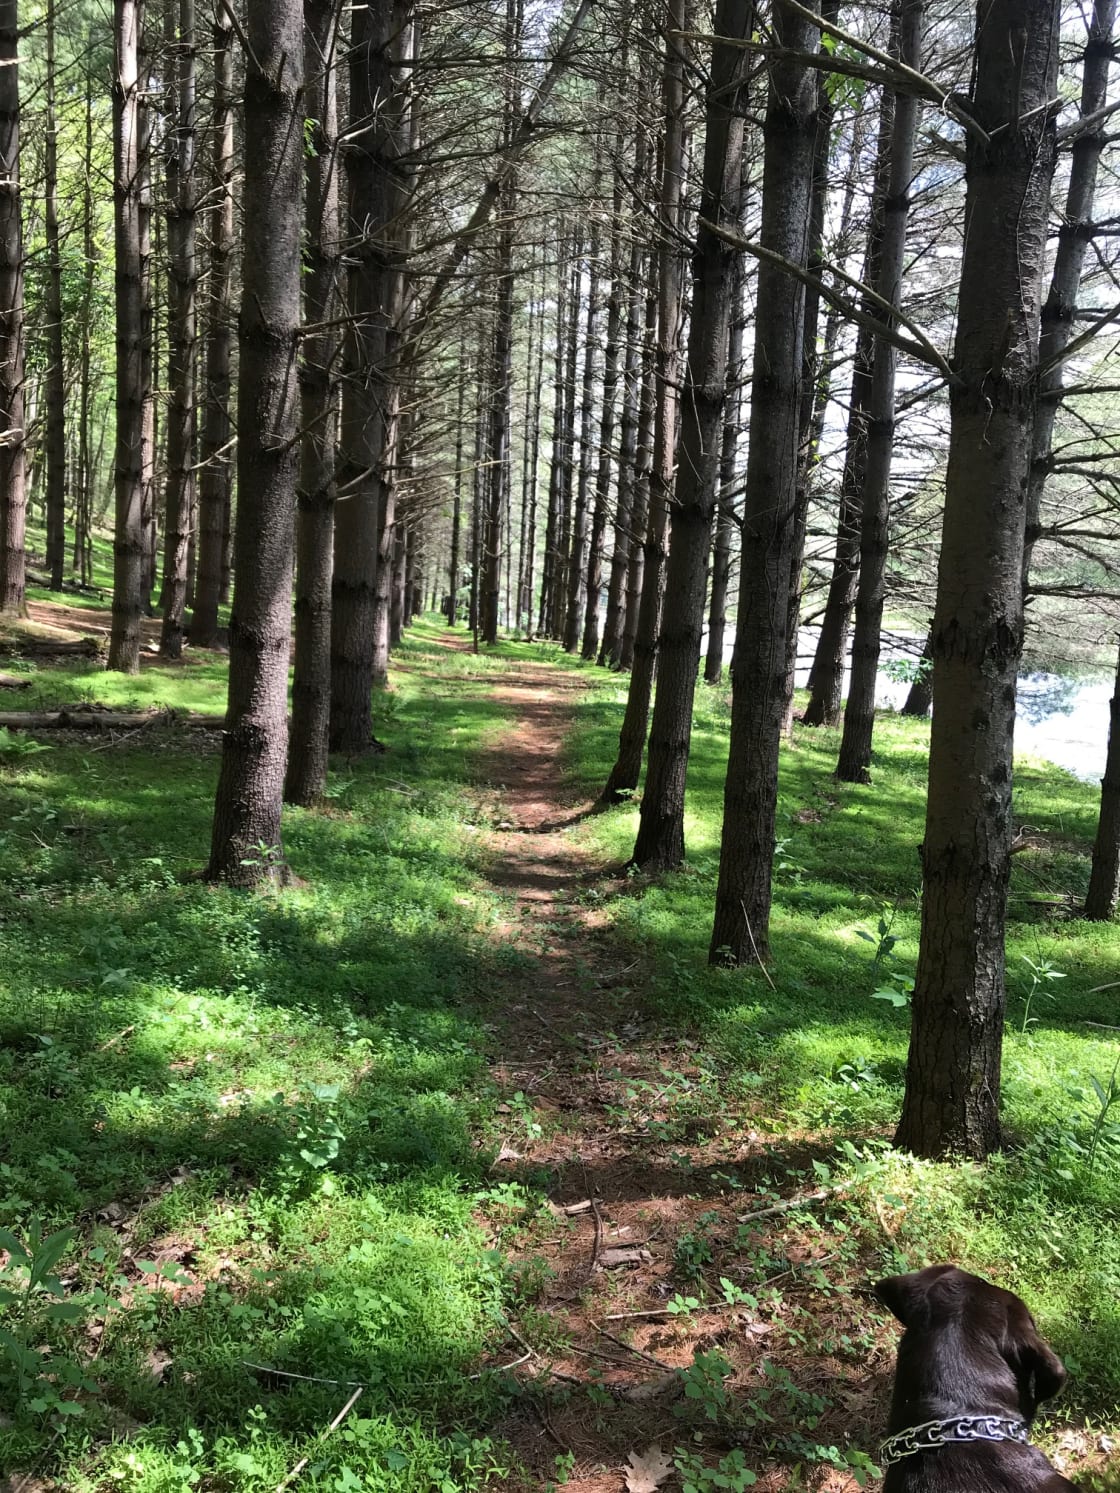 Enjoy a hike at the New River State Park - the trails are gorgeous and the park is impeccably maintained!